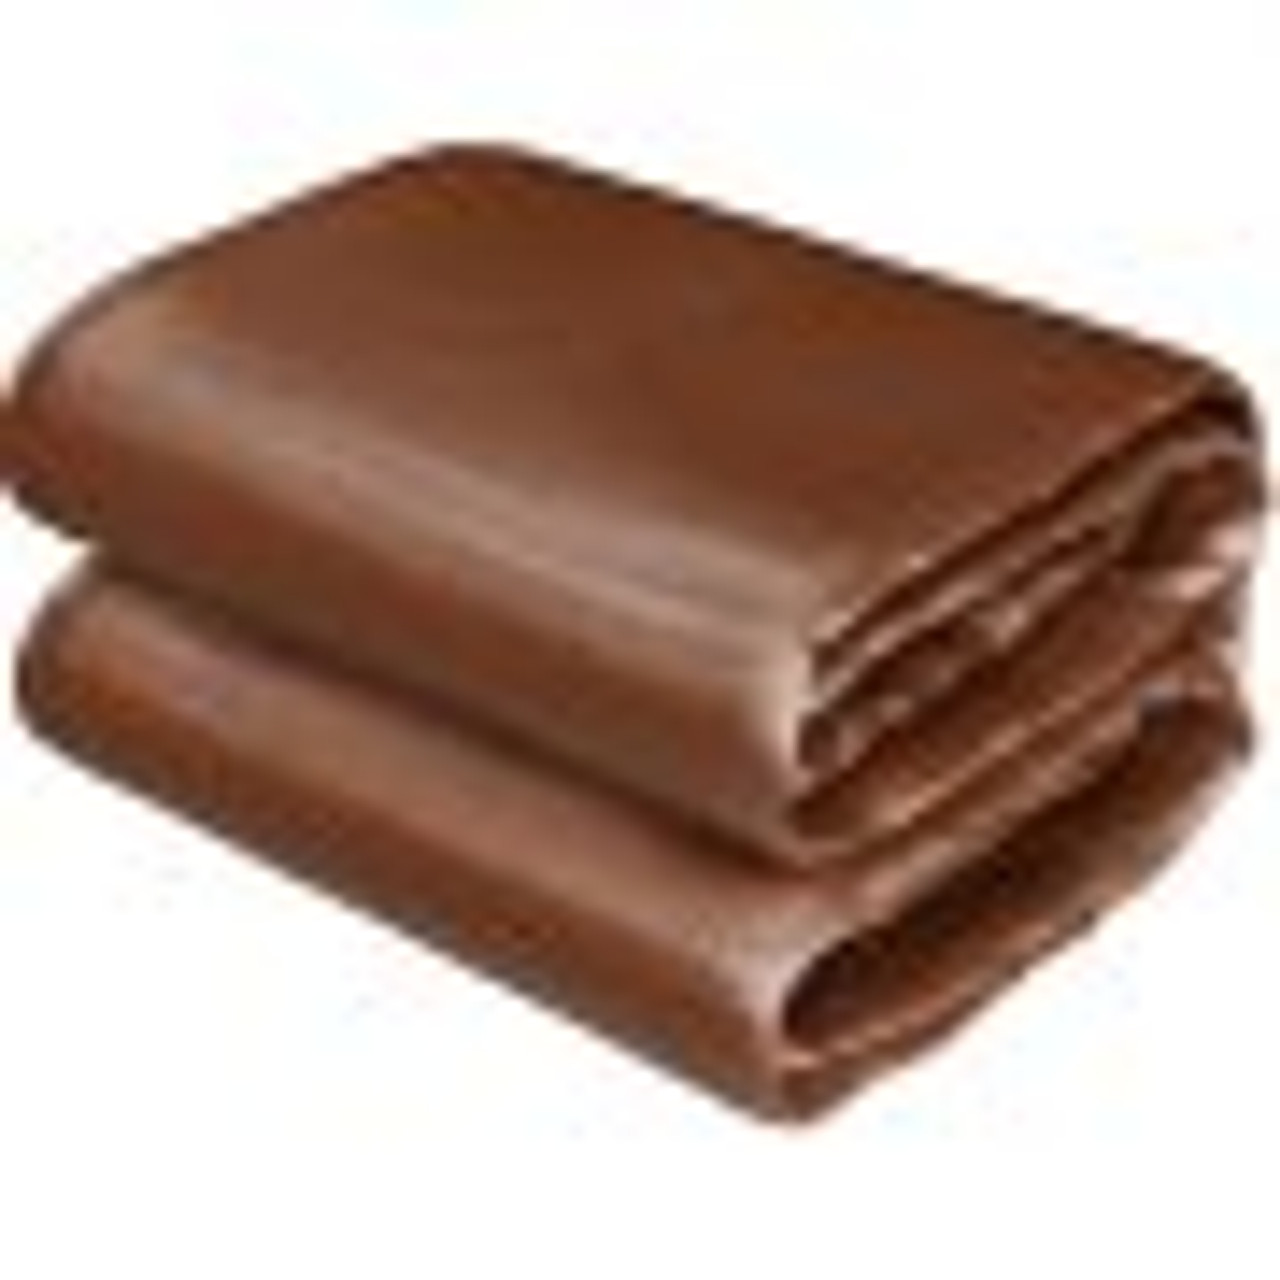 Heavy Duty Tarp, 30 x 40 ft 16 Mil Thick, Waterproof & Sunproof Outdoor Cover, Rip and Tear Proof PE Tarpaulin with Grommets and Reinforced Edges for Truck, RV, Boat, Roof, Tent, Camping, Brown